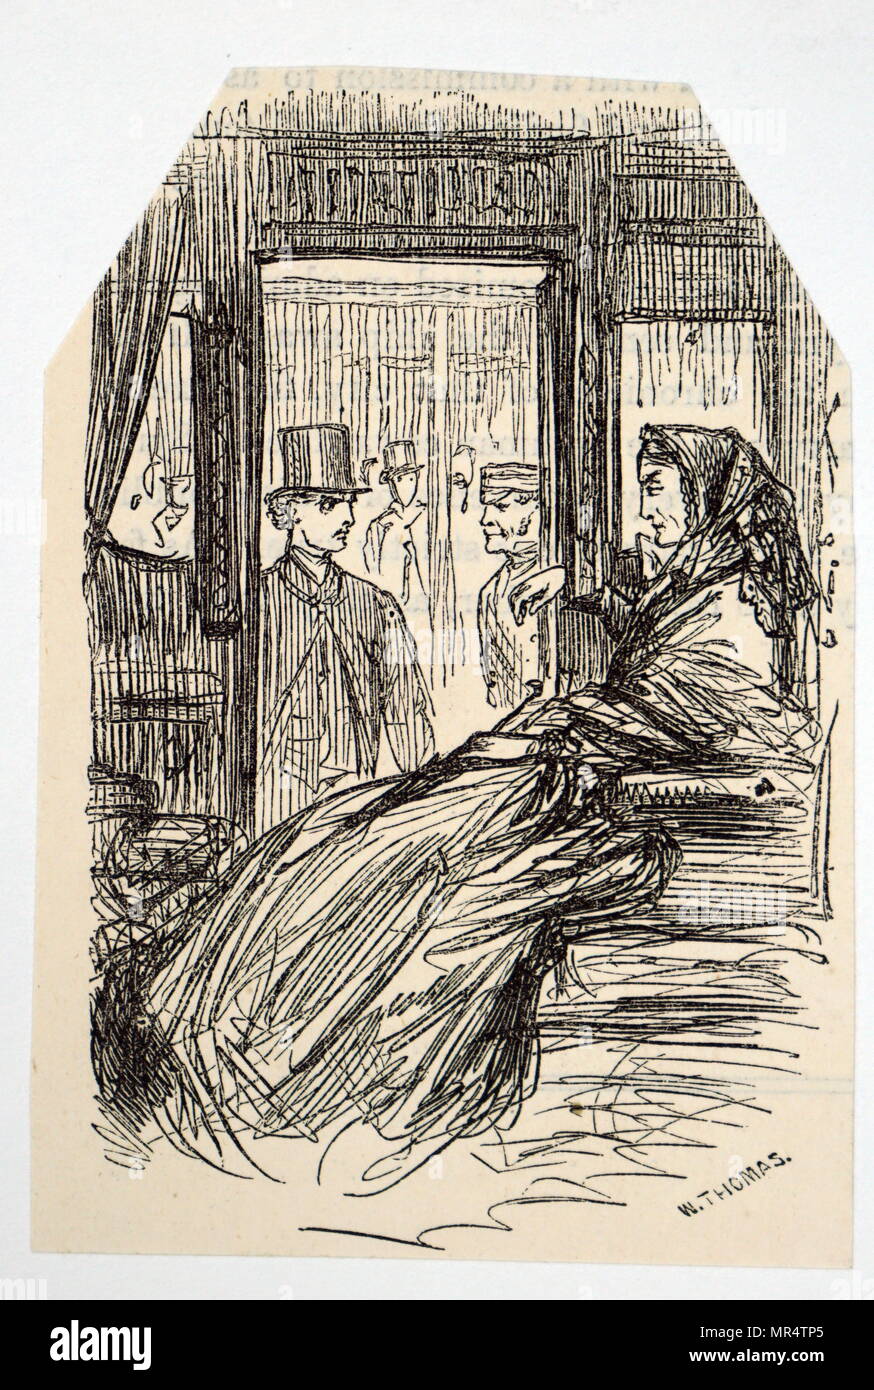 Illustration depicting a female passenger sitting in a train carriage wait to start her journey. Illustrated by Thomas Waterman Wood (1823-1903) an American painter. Dated 19th century Stock Photo